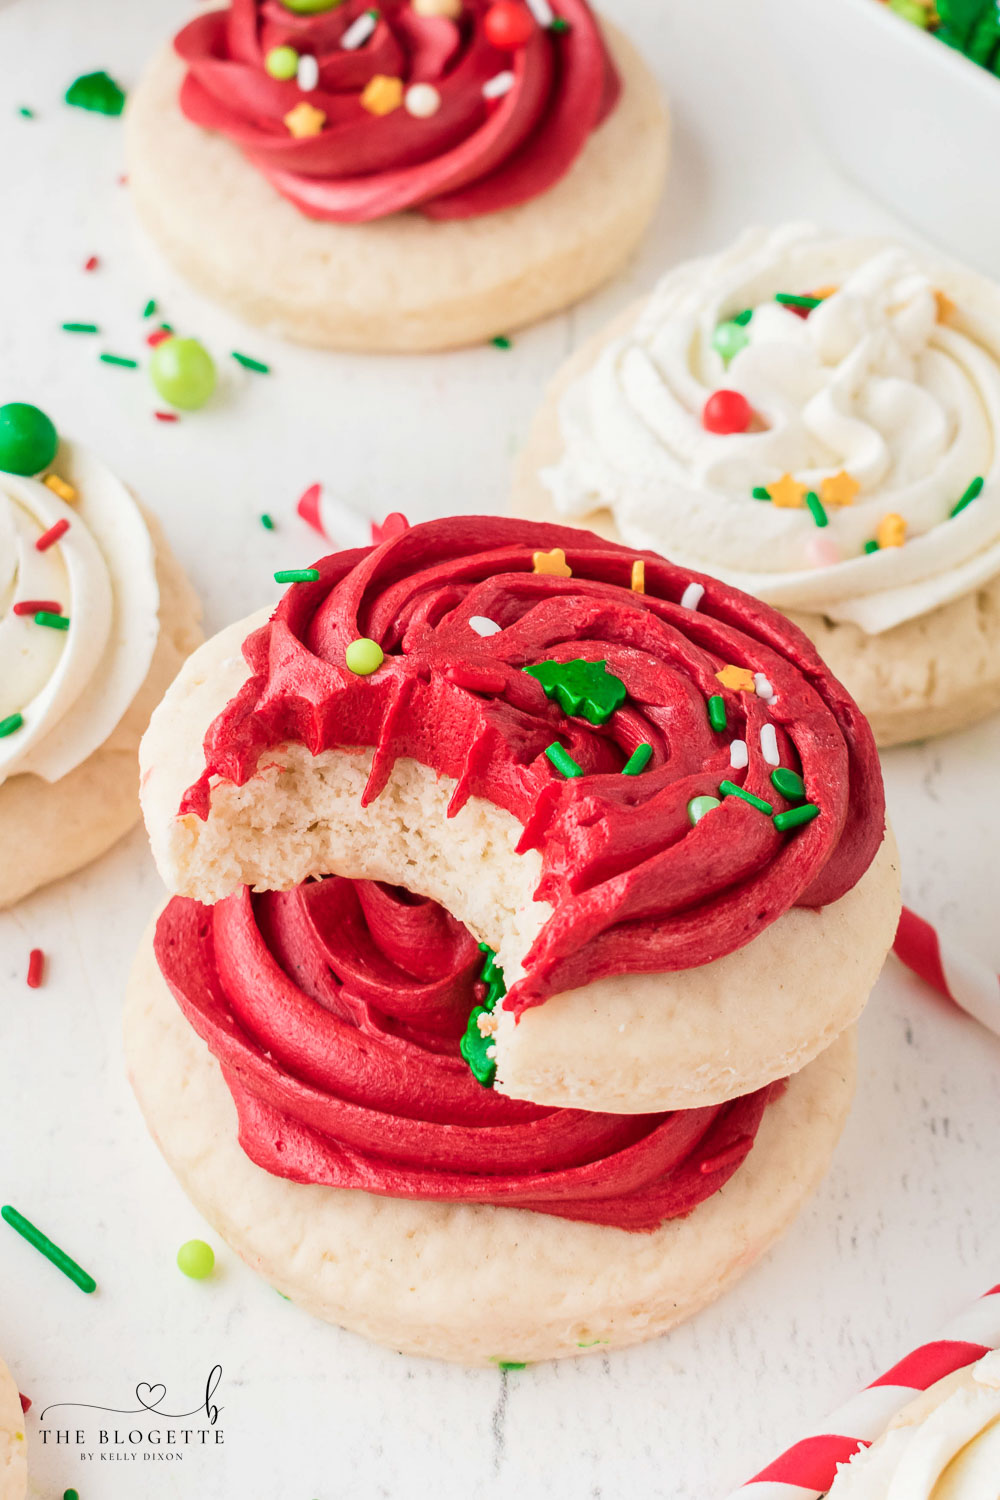 Homemade Lofthouse Christmas Cookies are even better than the delicious ones you buy at the grocery store. So fun to make and decorate!